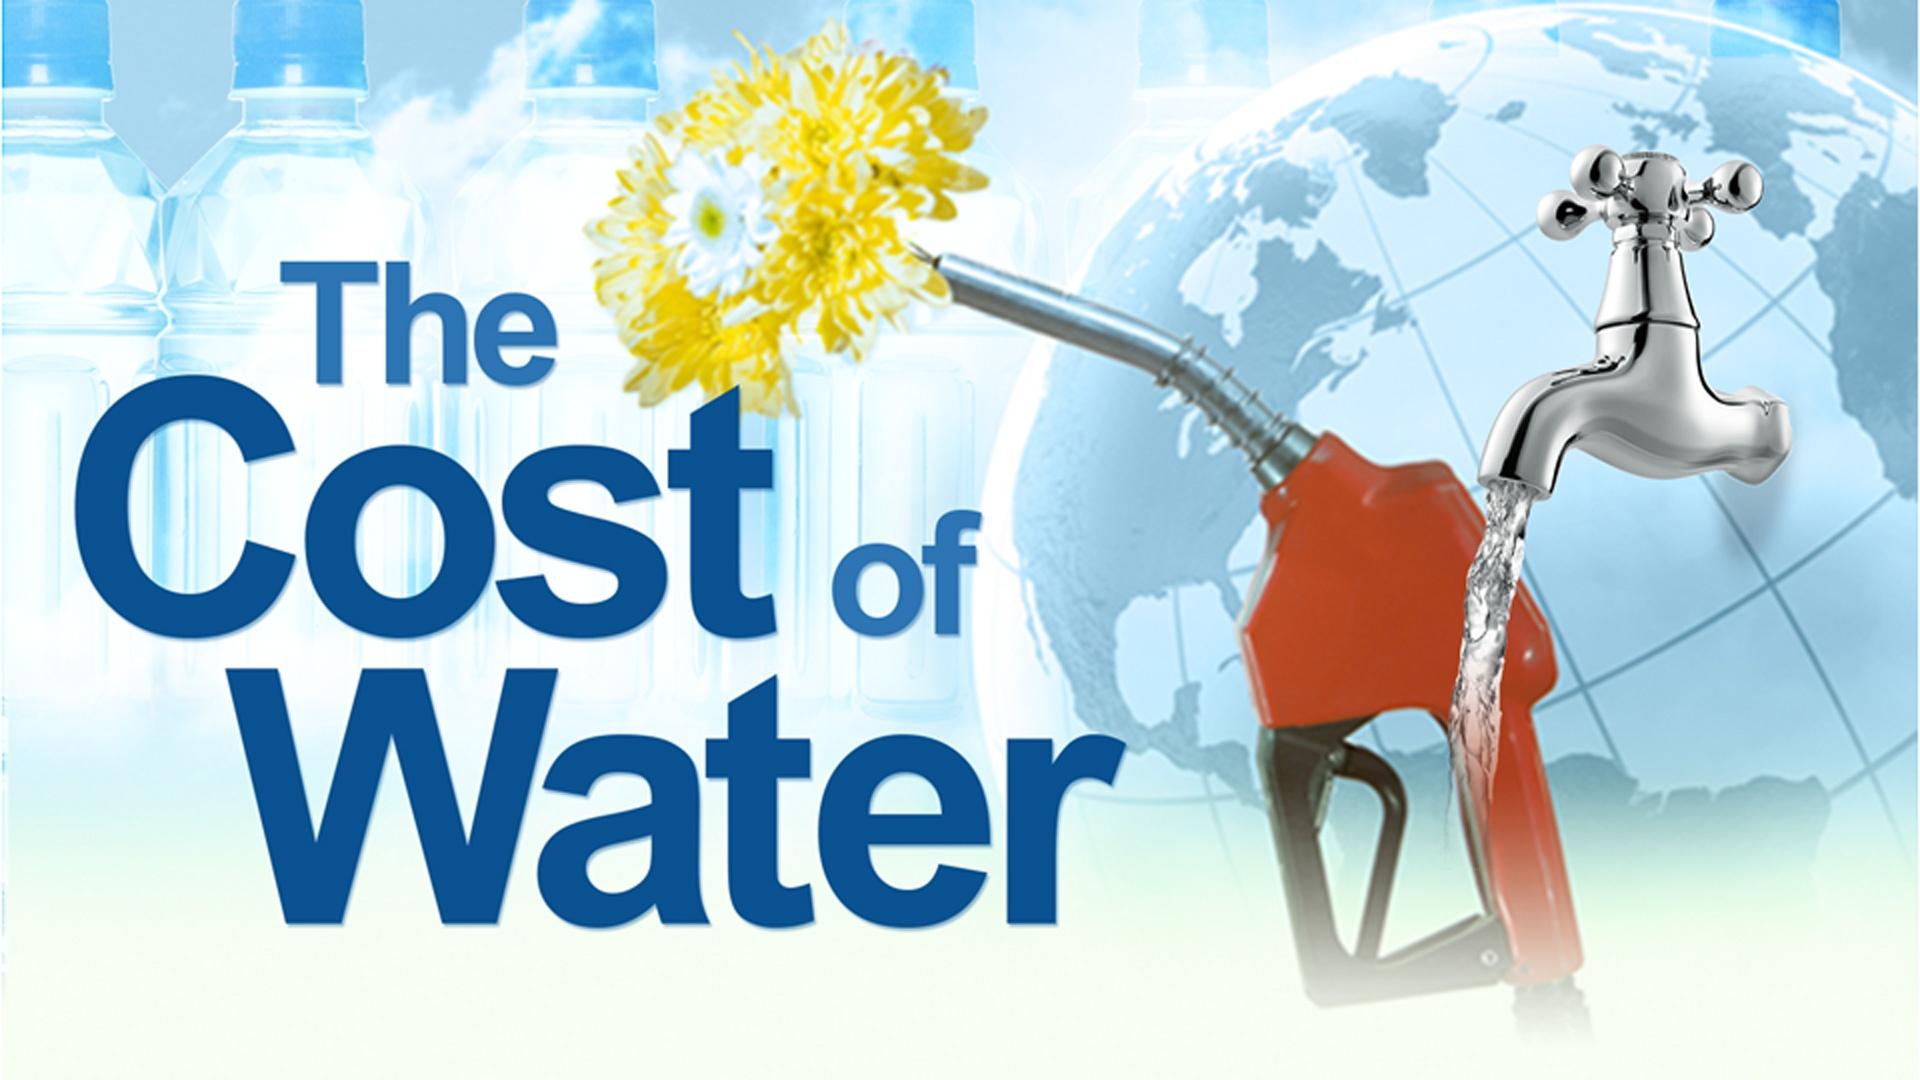 The Cost of Water! PBS LearningMedia